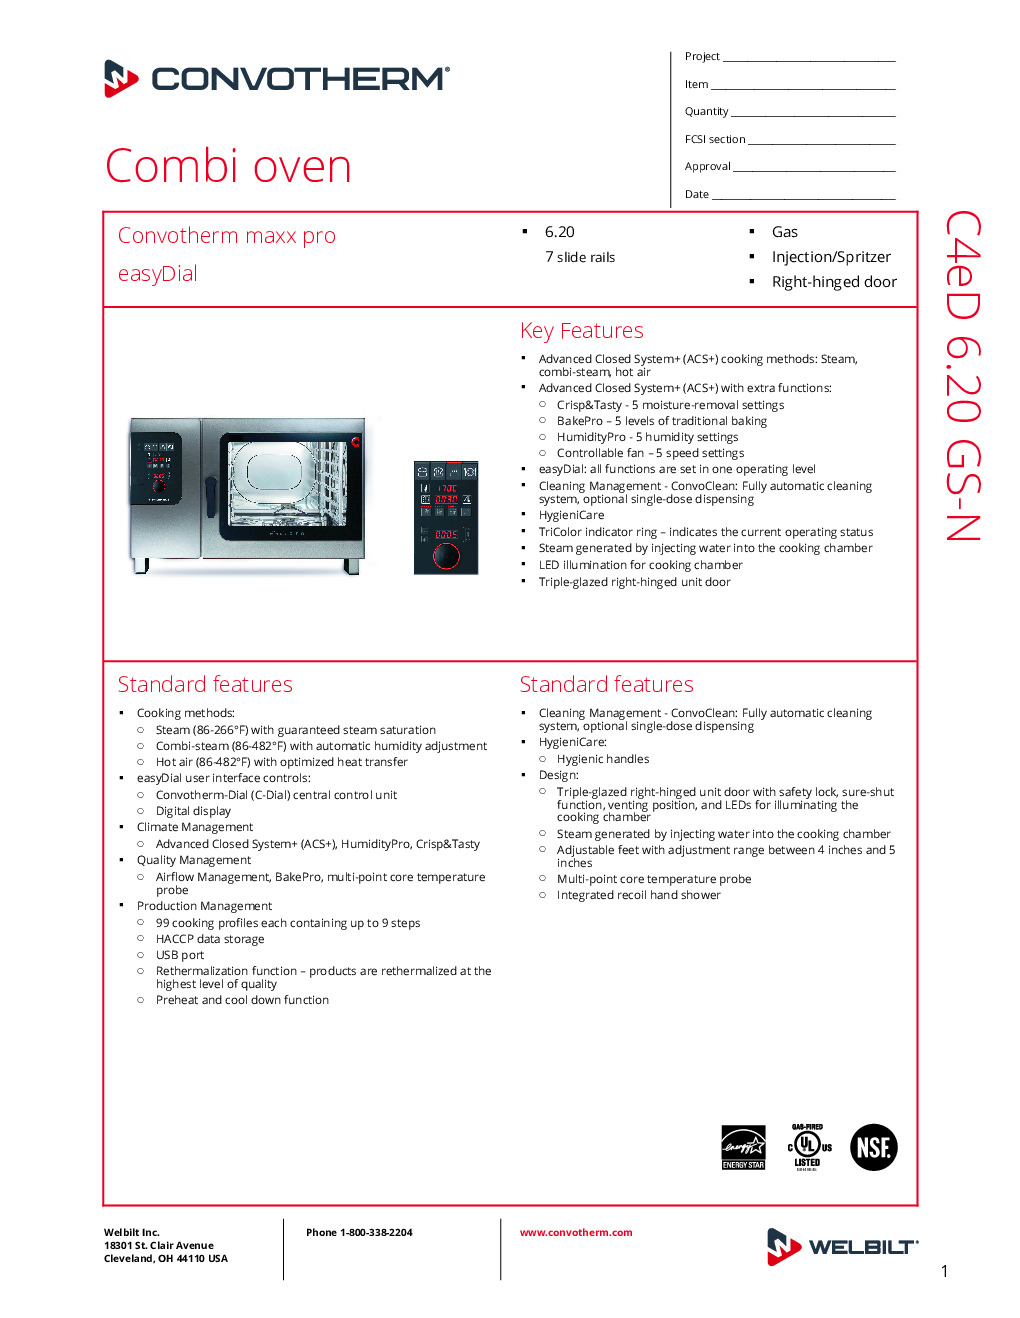 Convotherm C4 ED 6.20GS-N Gas Combi Oven